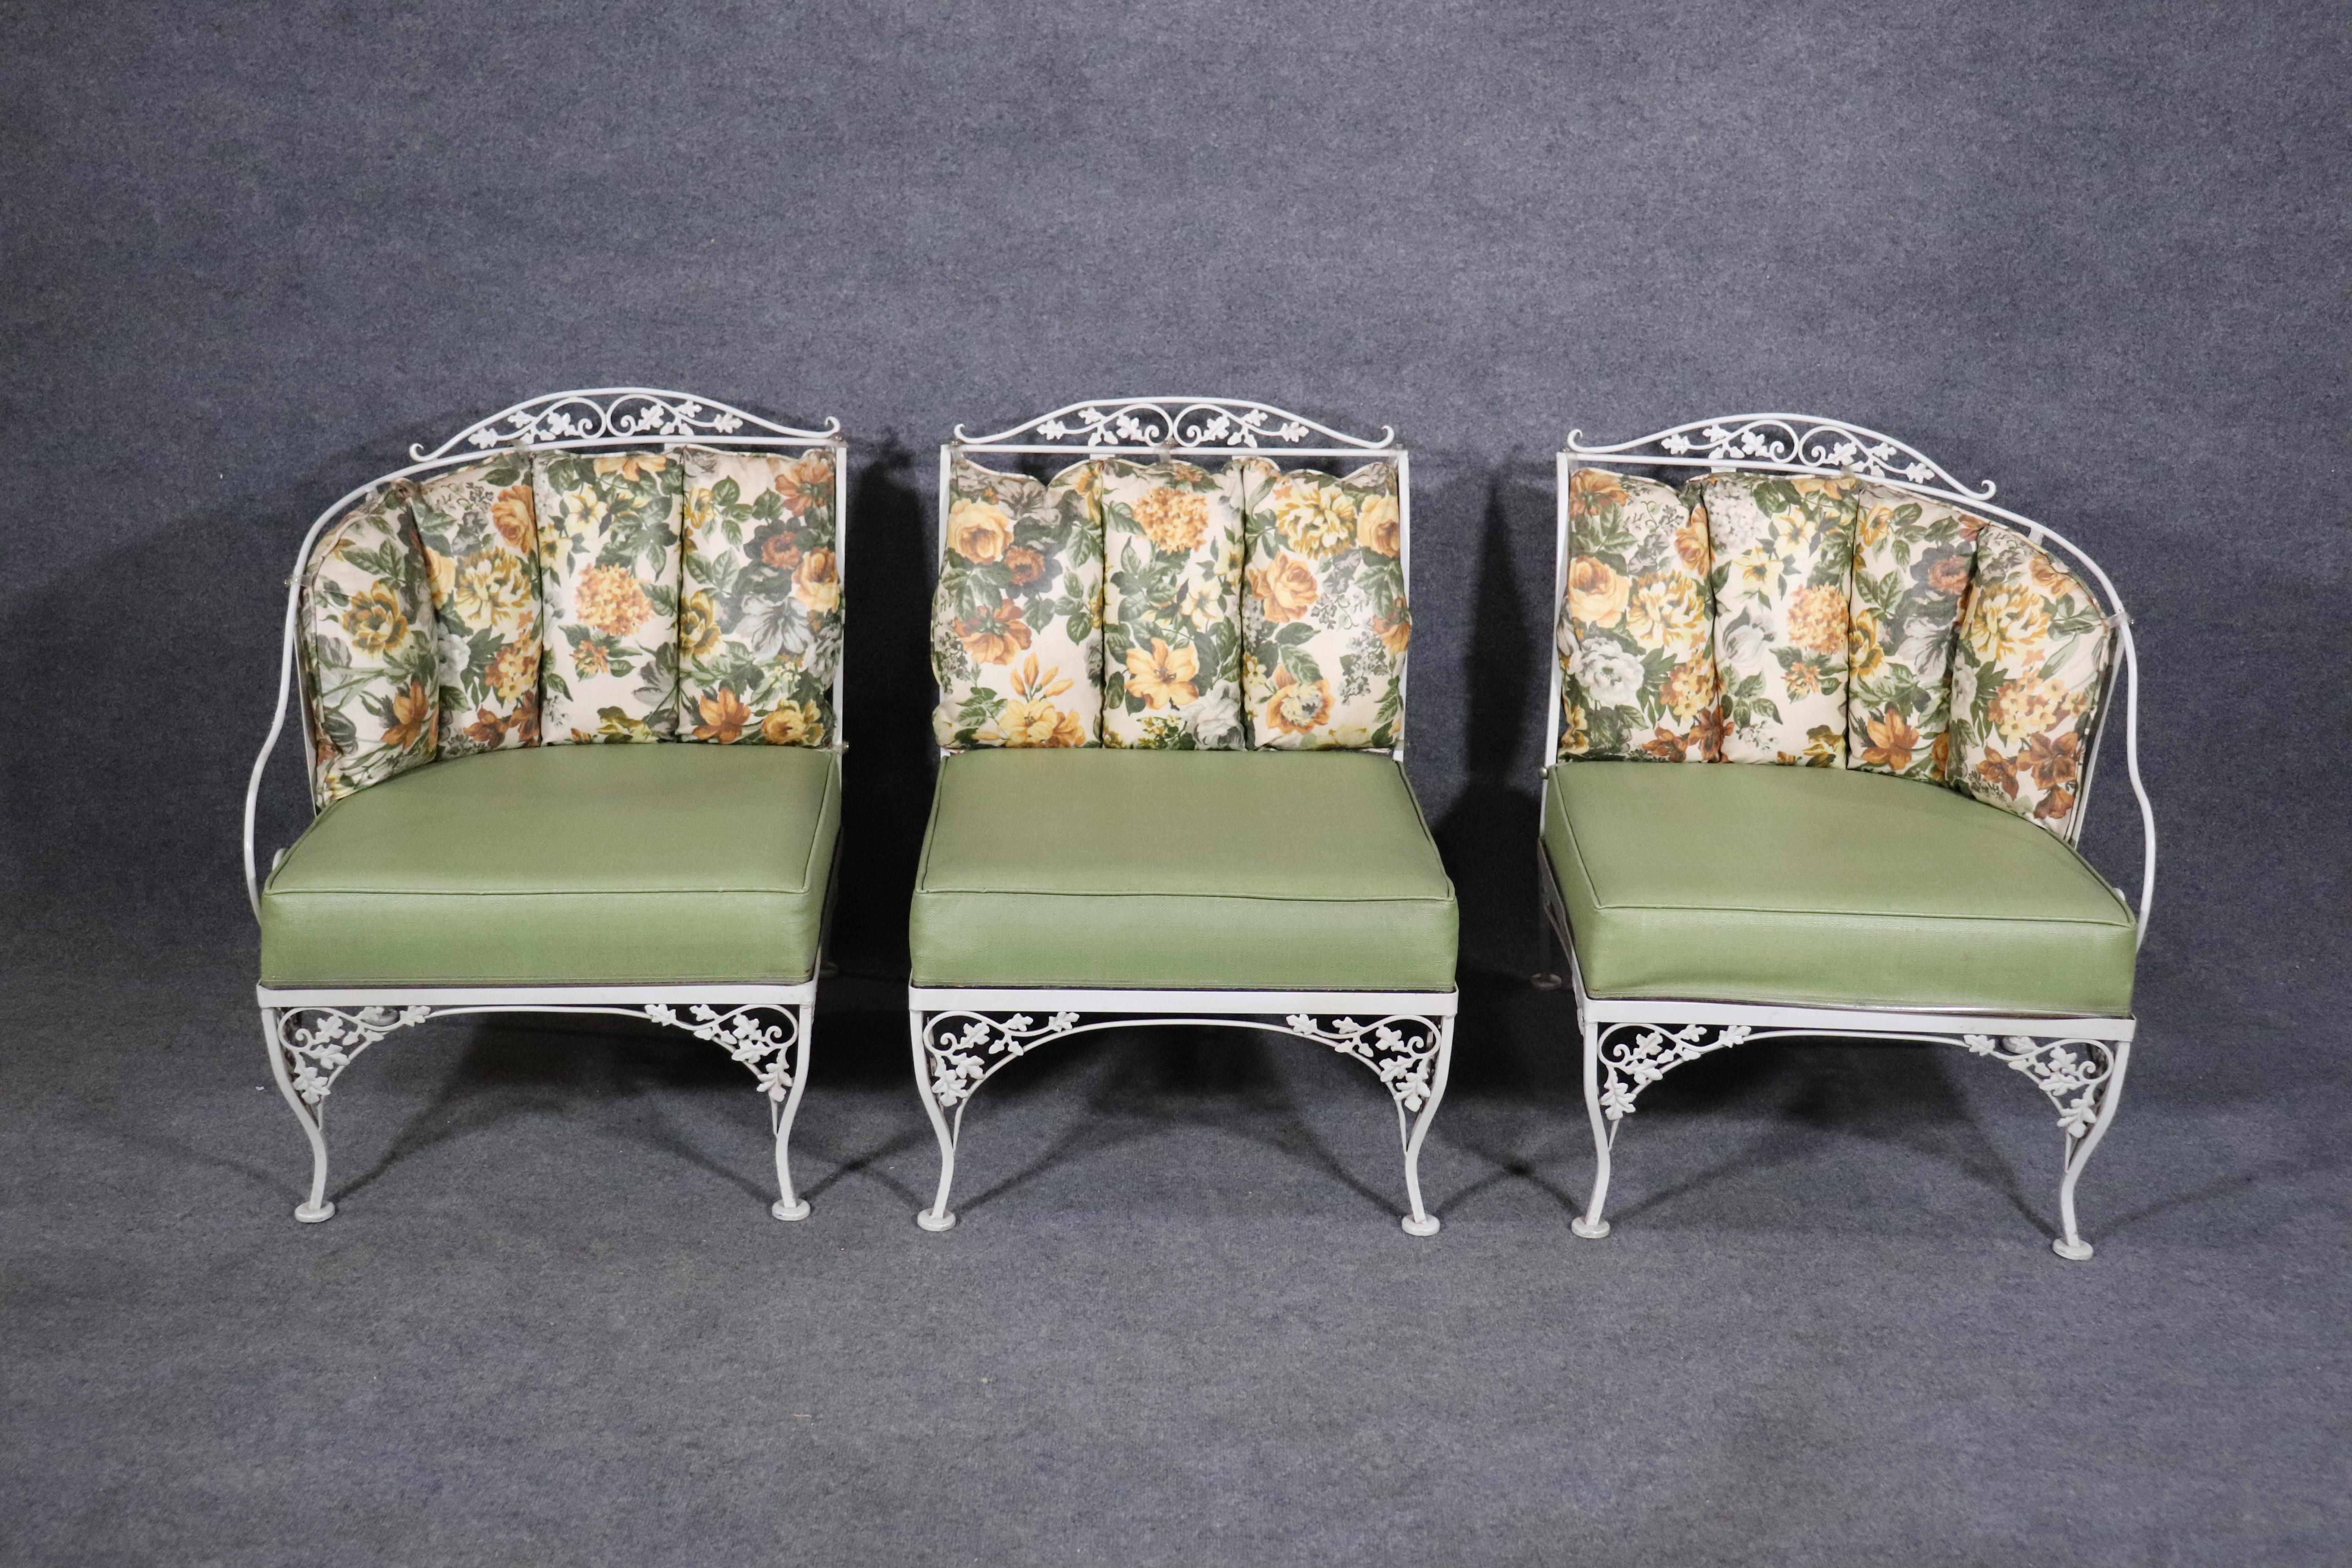 Vintage outdoor sofa set with four movable pieces. Wrought iron frame with curved back and ornate floral embellishments. 
Please confirm location NY or NJ.